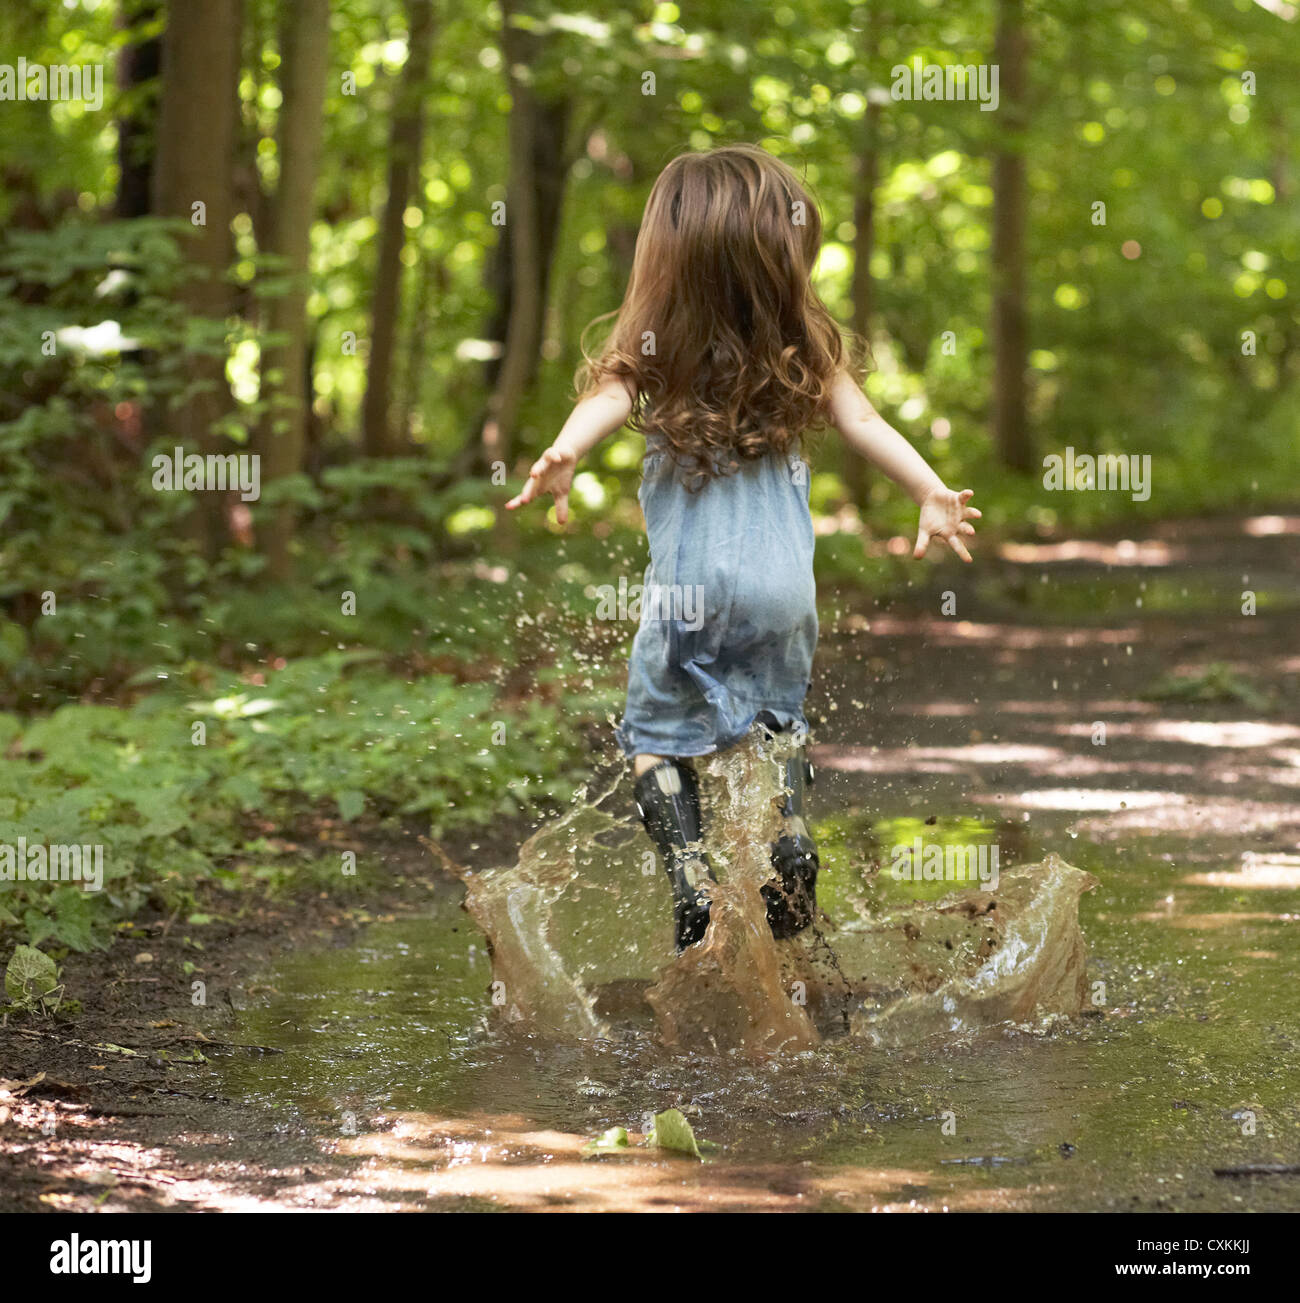 Little girl jumping in puddle Banque D'Images